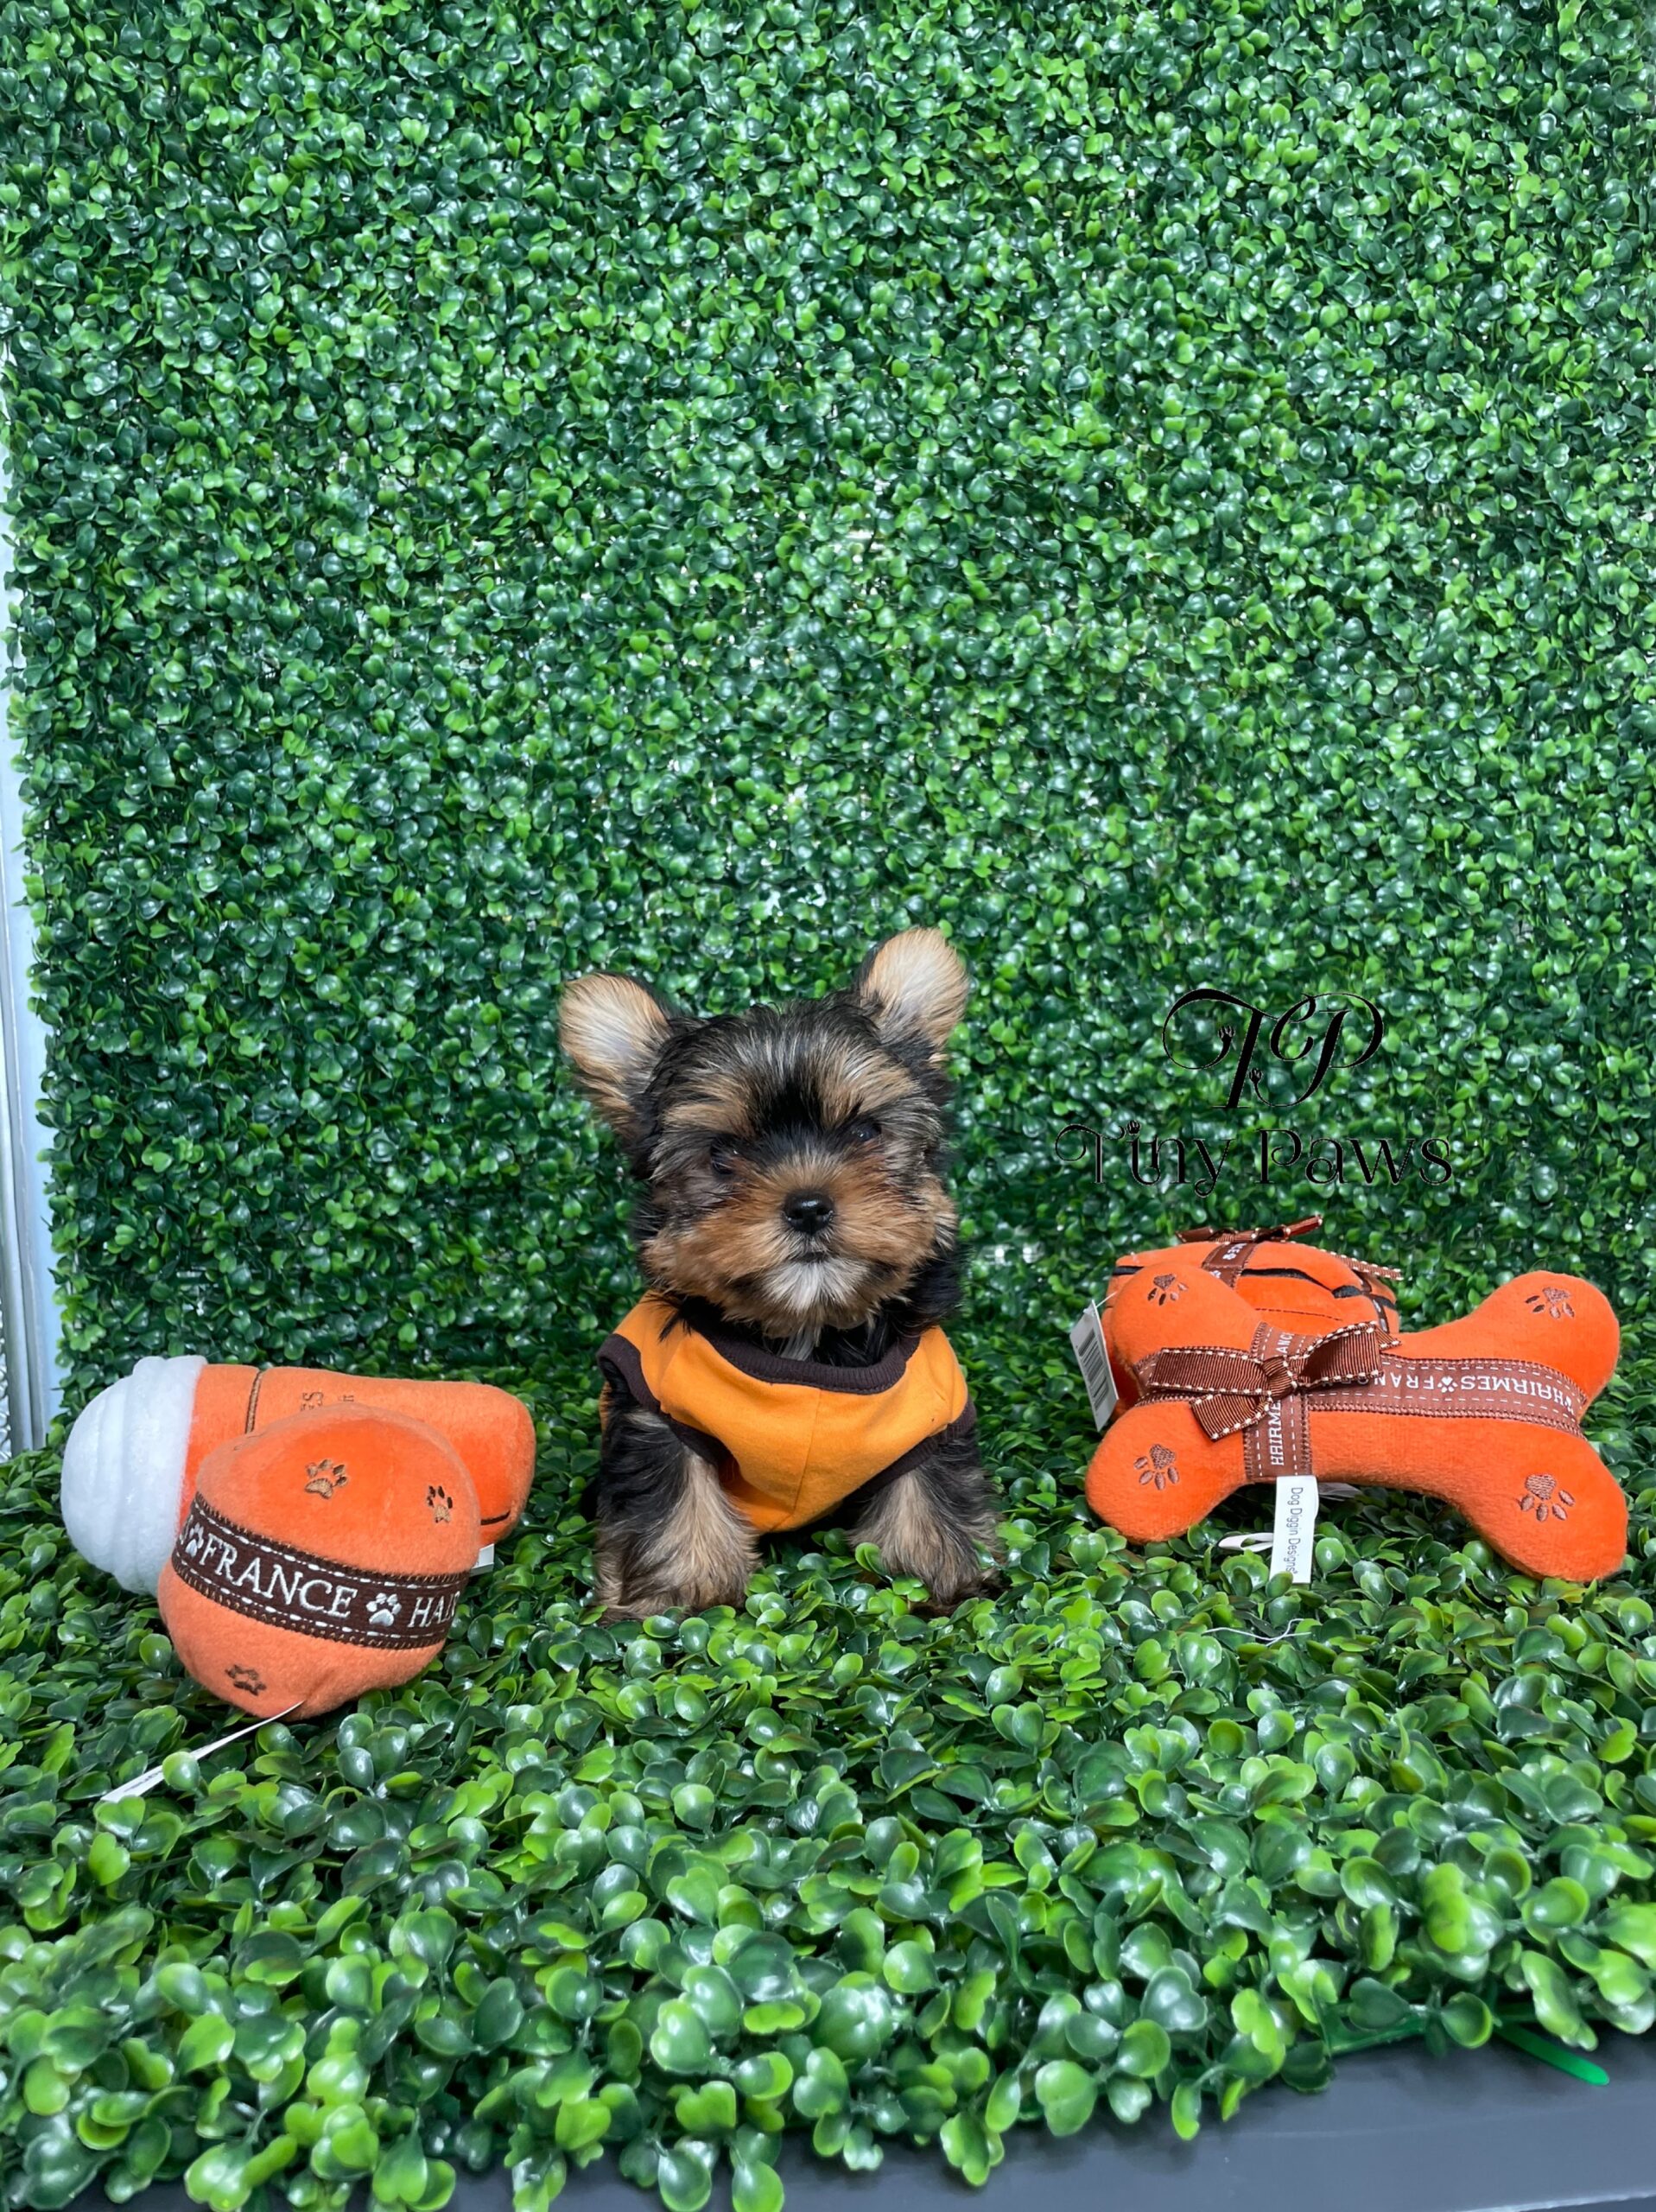 Tiny Teacup Yorkie Puppy For Sale